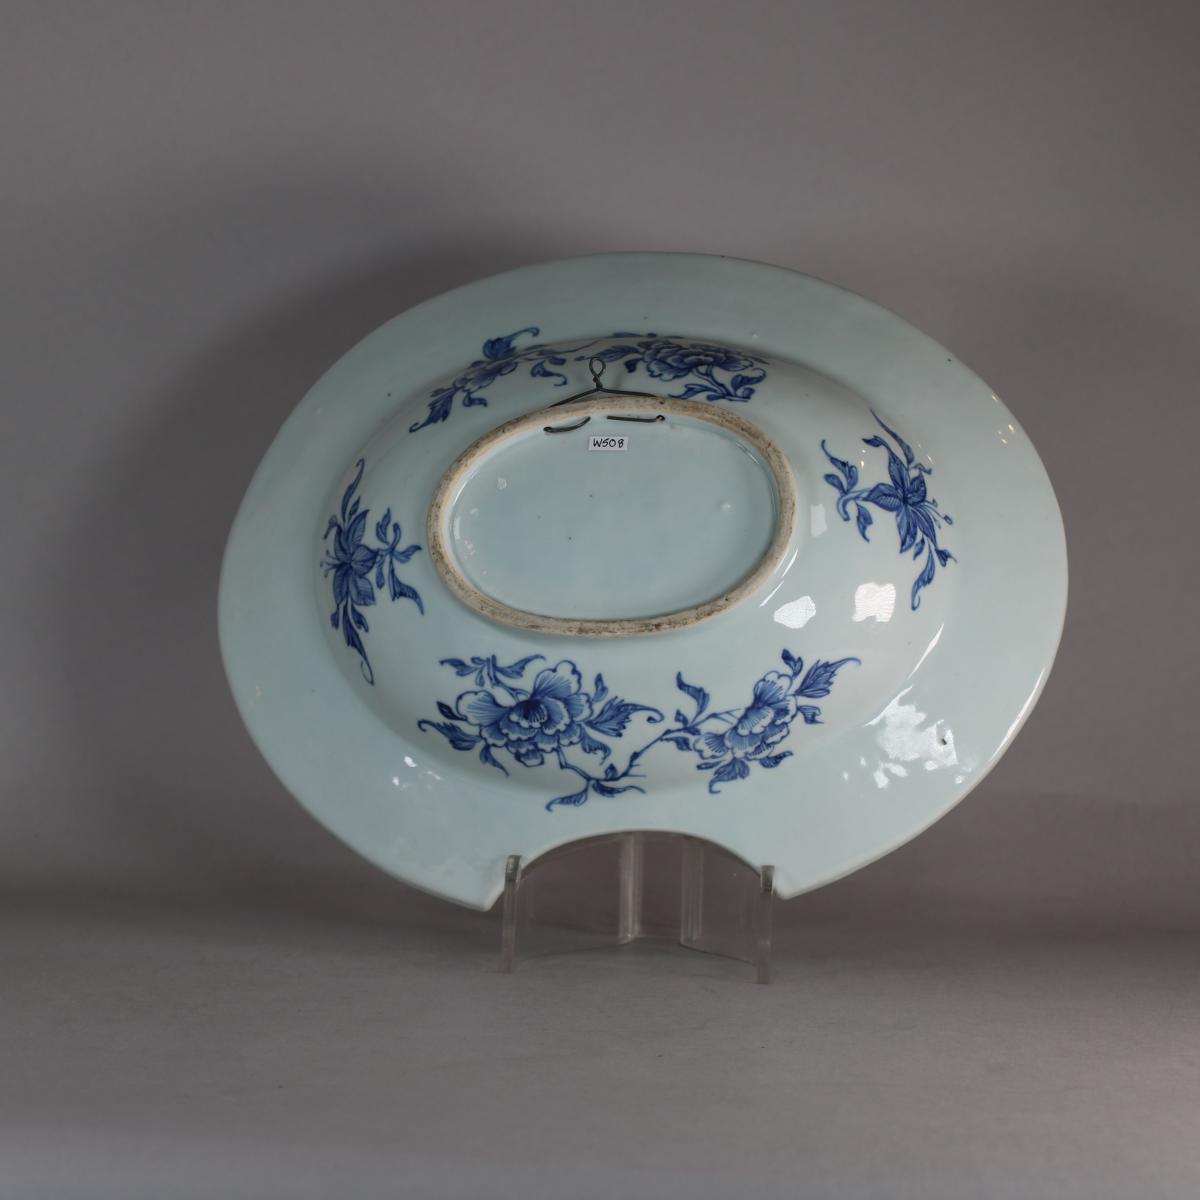 back view of blue and white barber's bowl